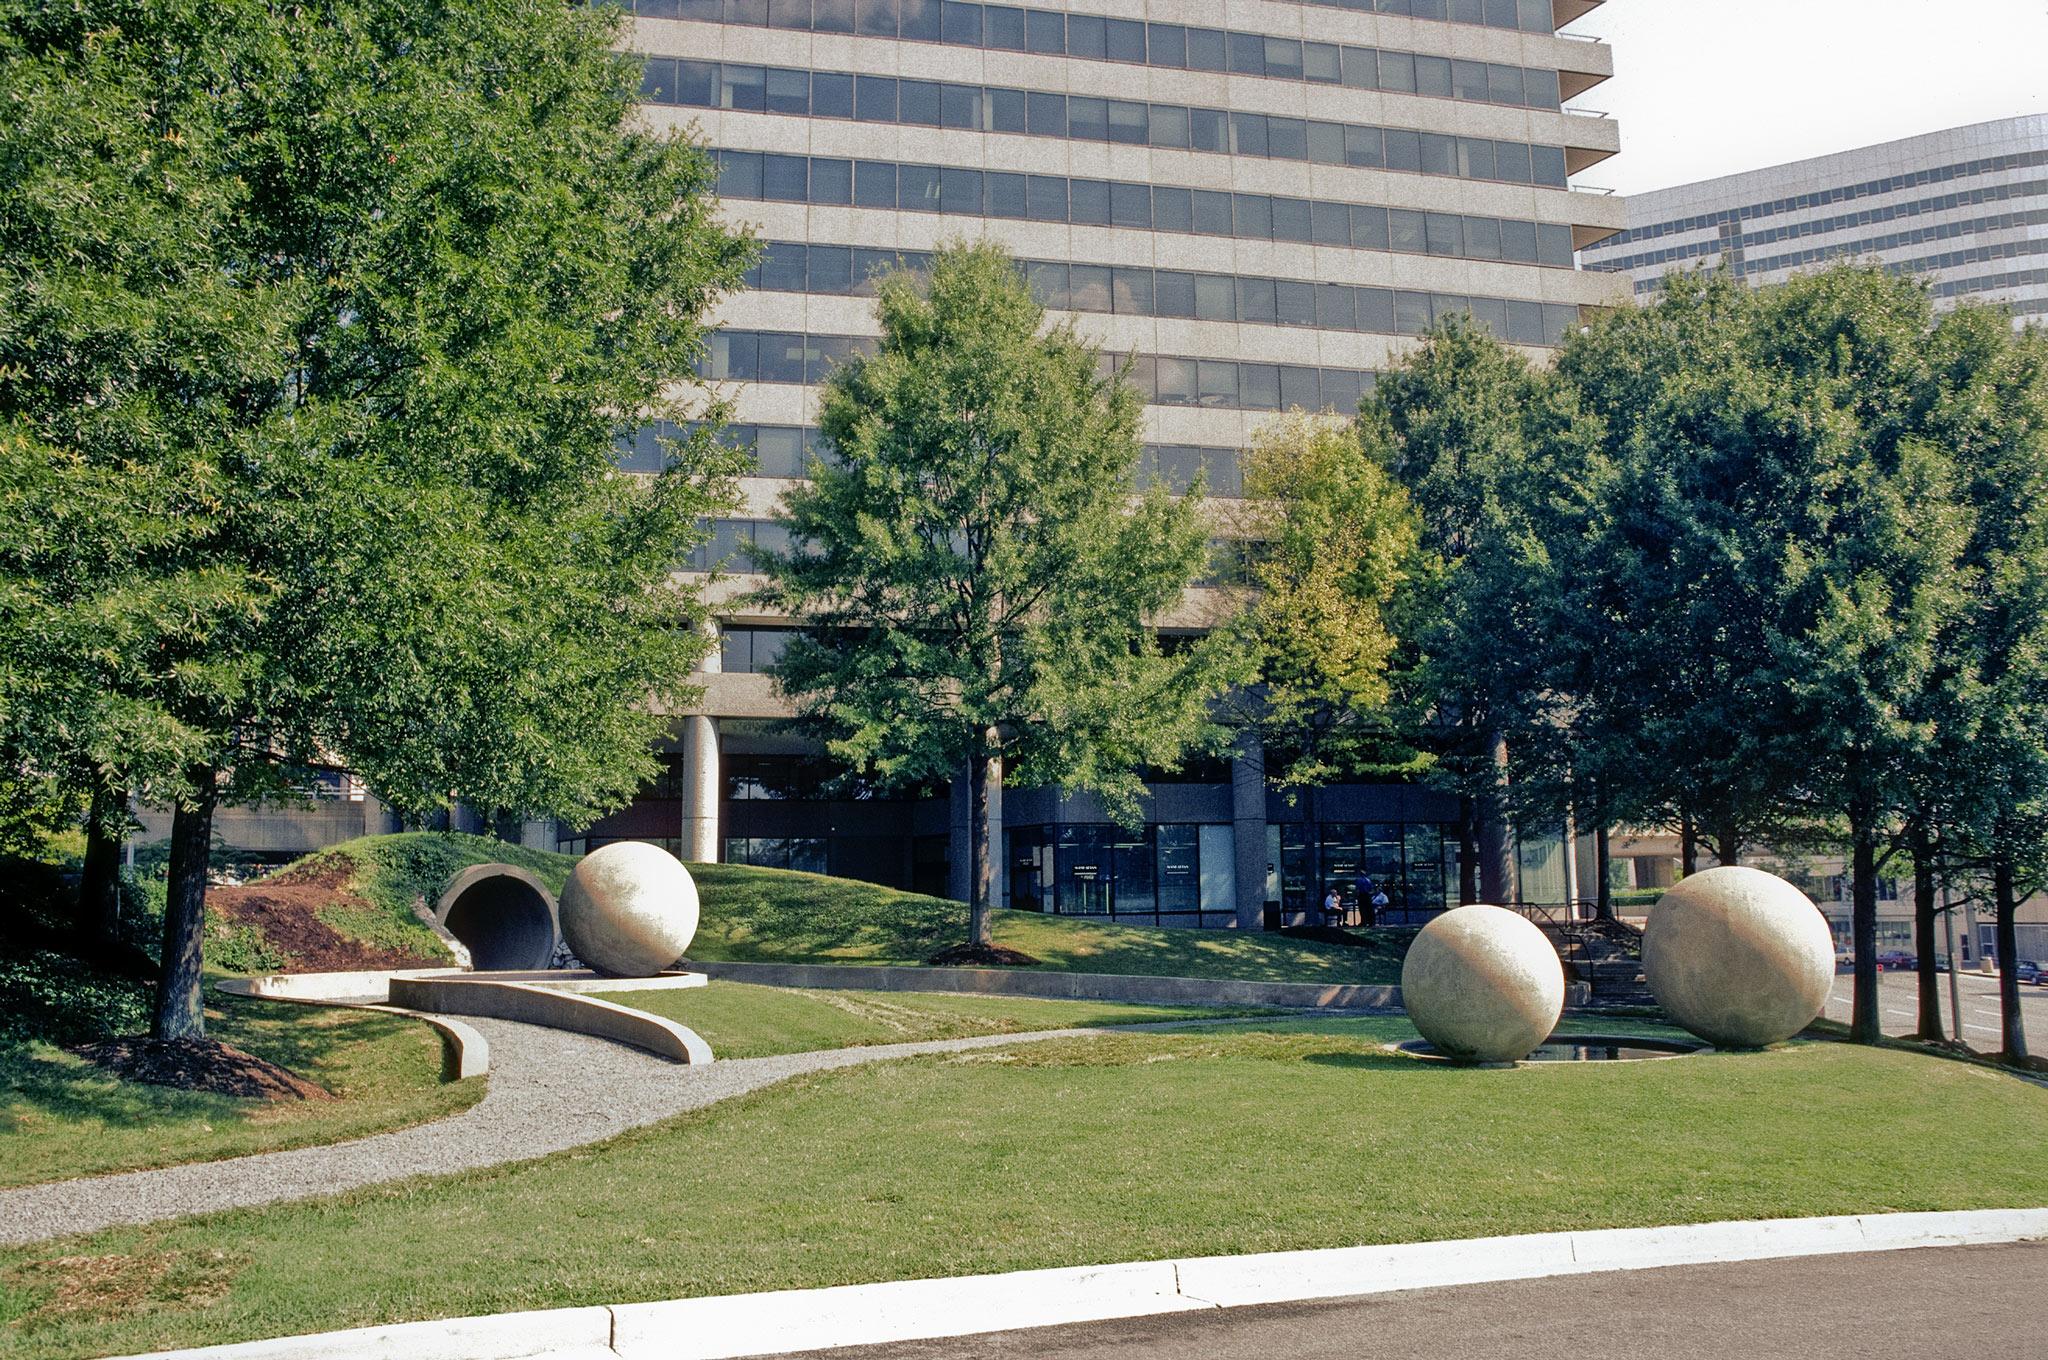 three large concrete spheres in a grassy park surrounded by trees and tall buildings